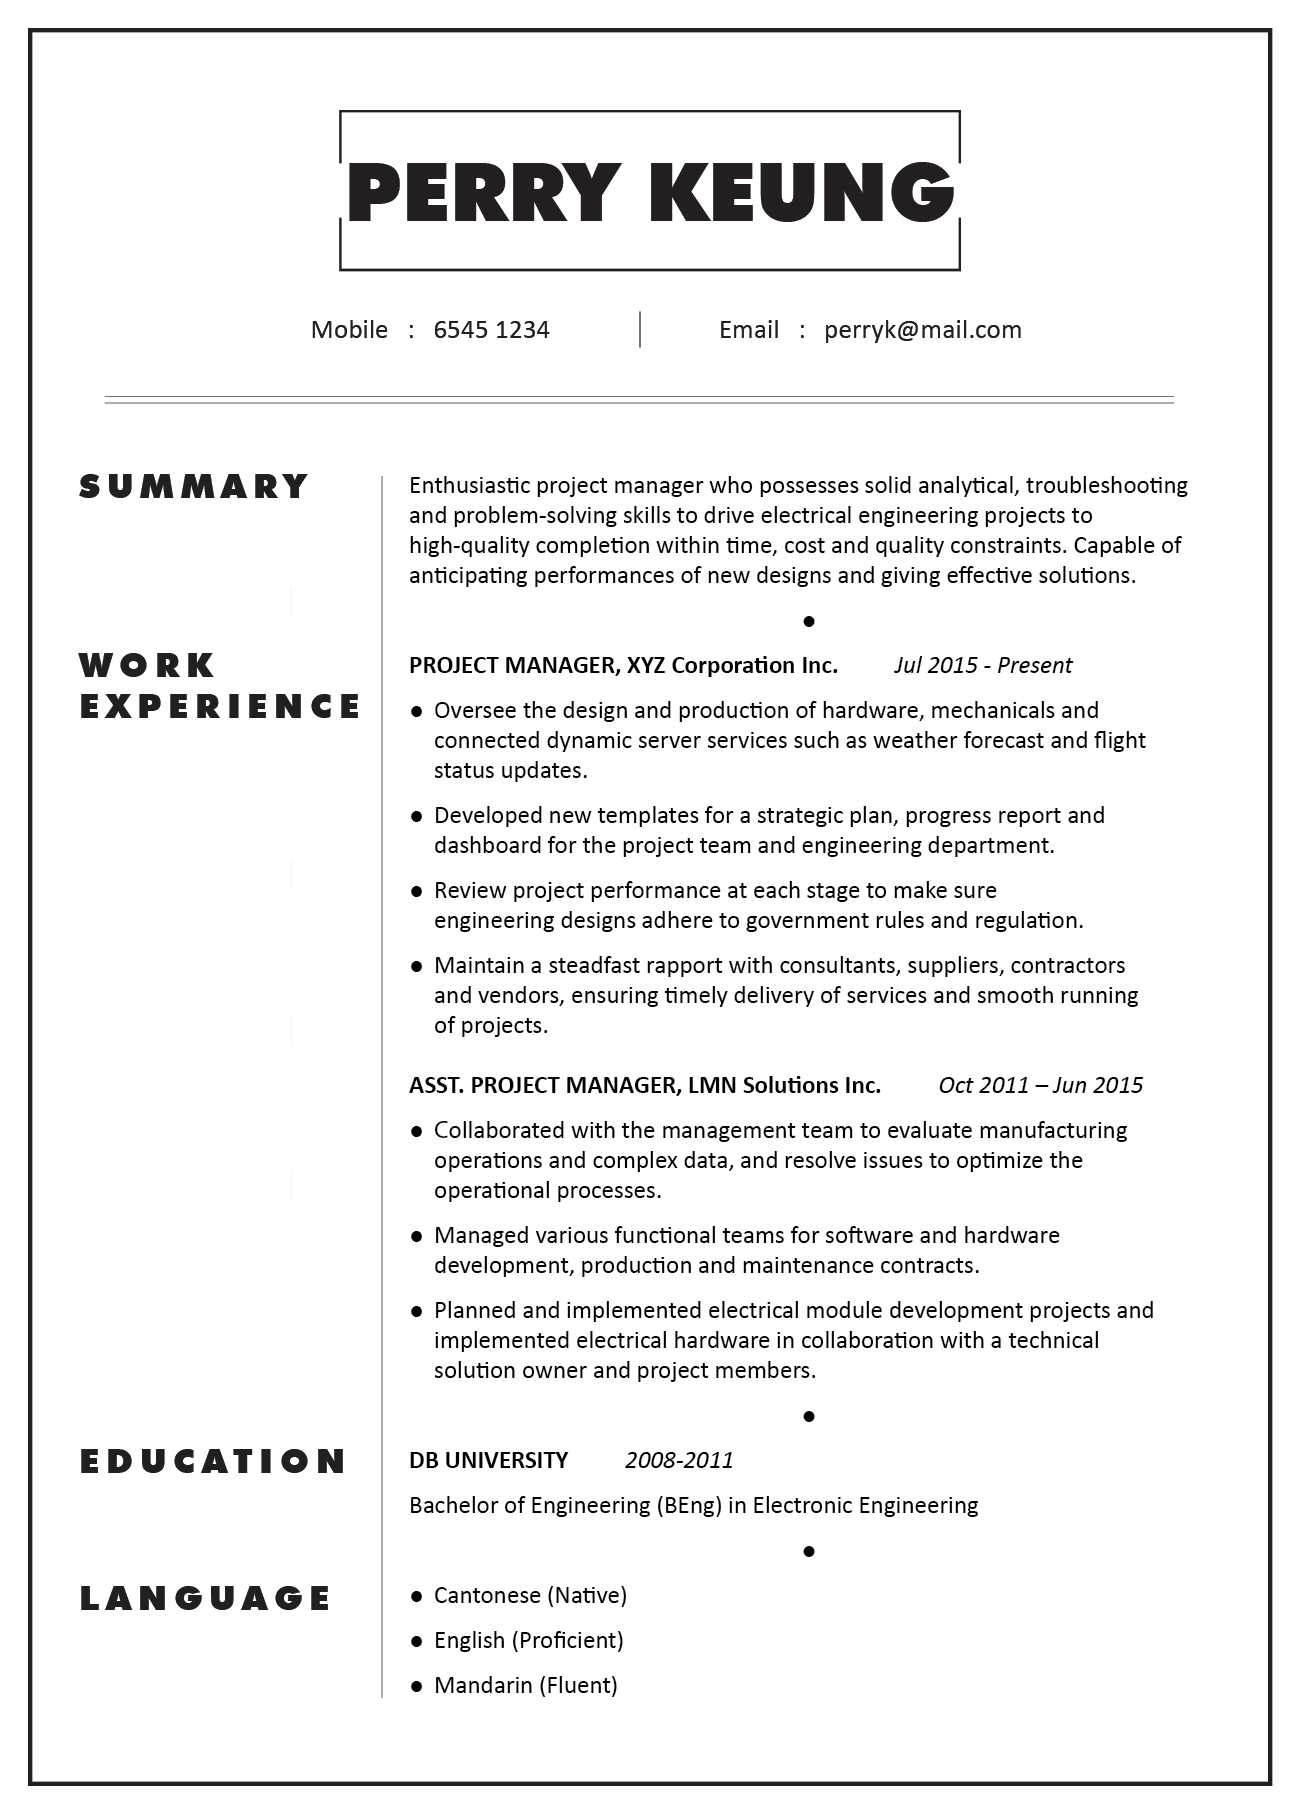 Cv Sample – Project Manager (Electronic/electrical Throughout Engineering Progress Report Template